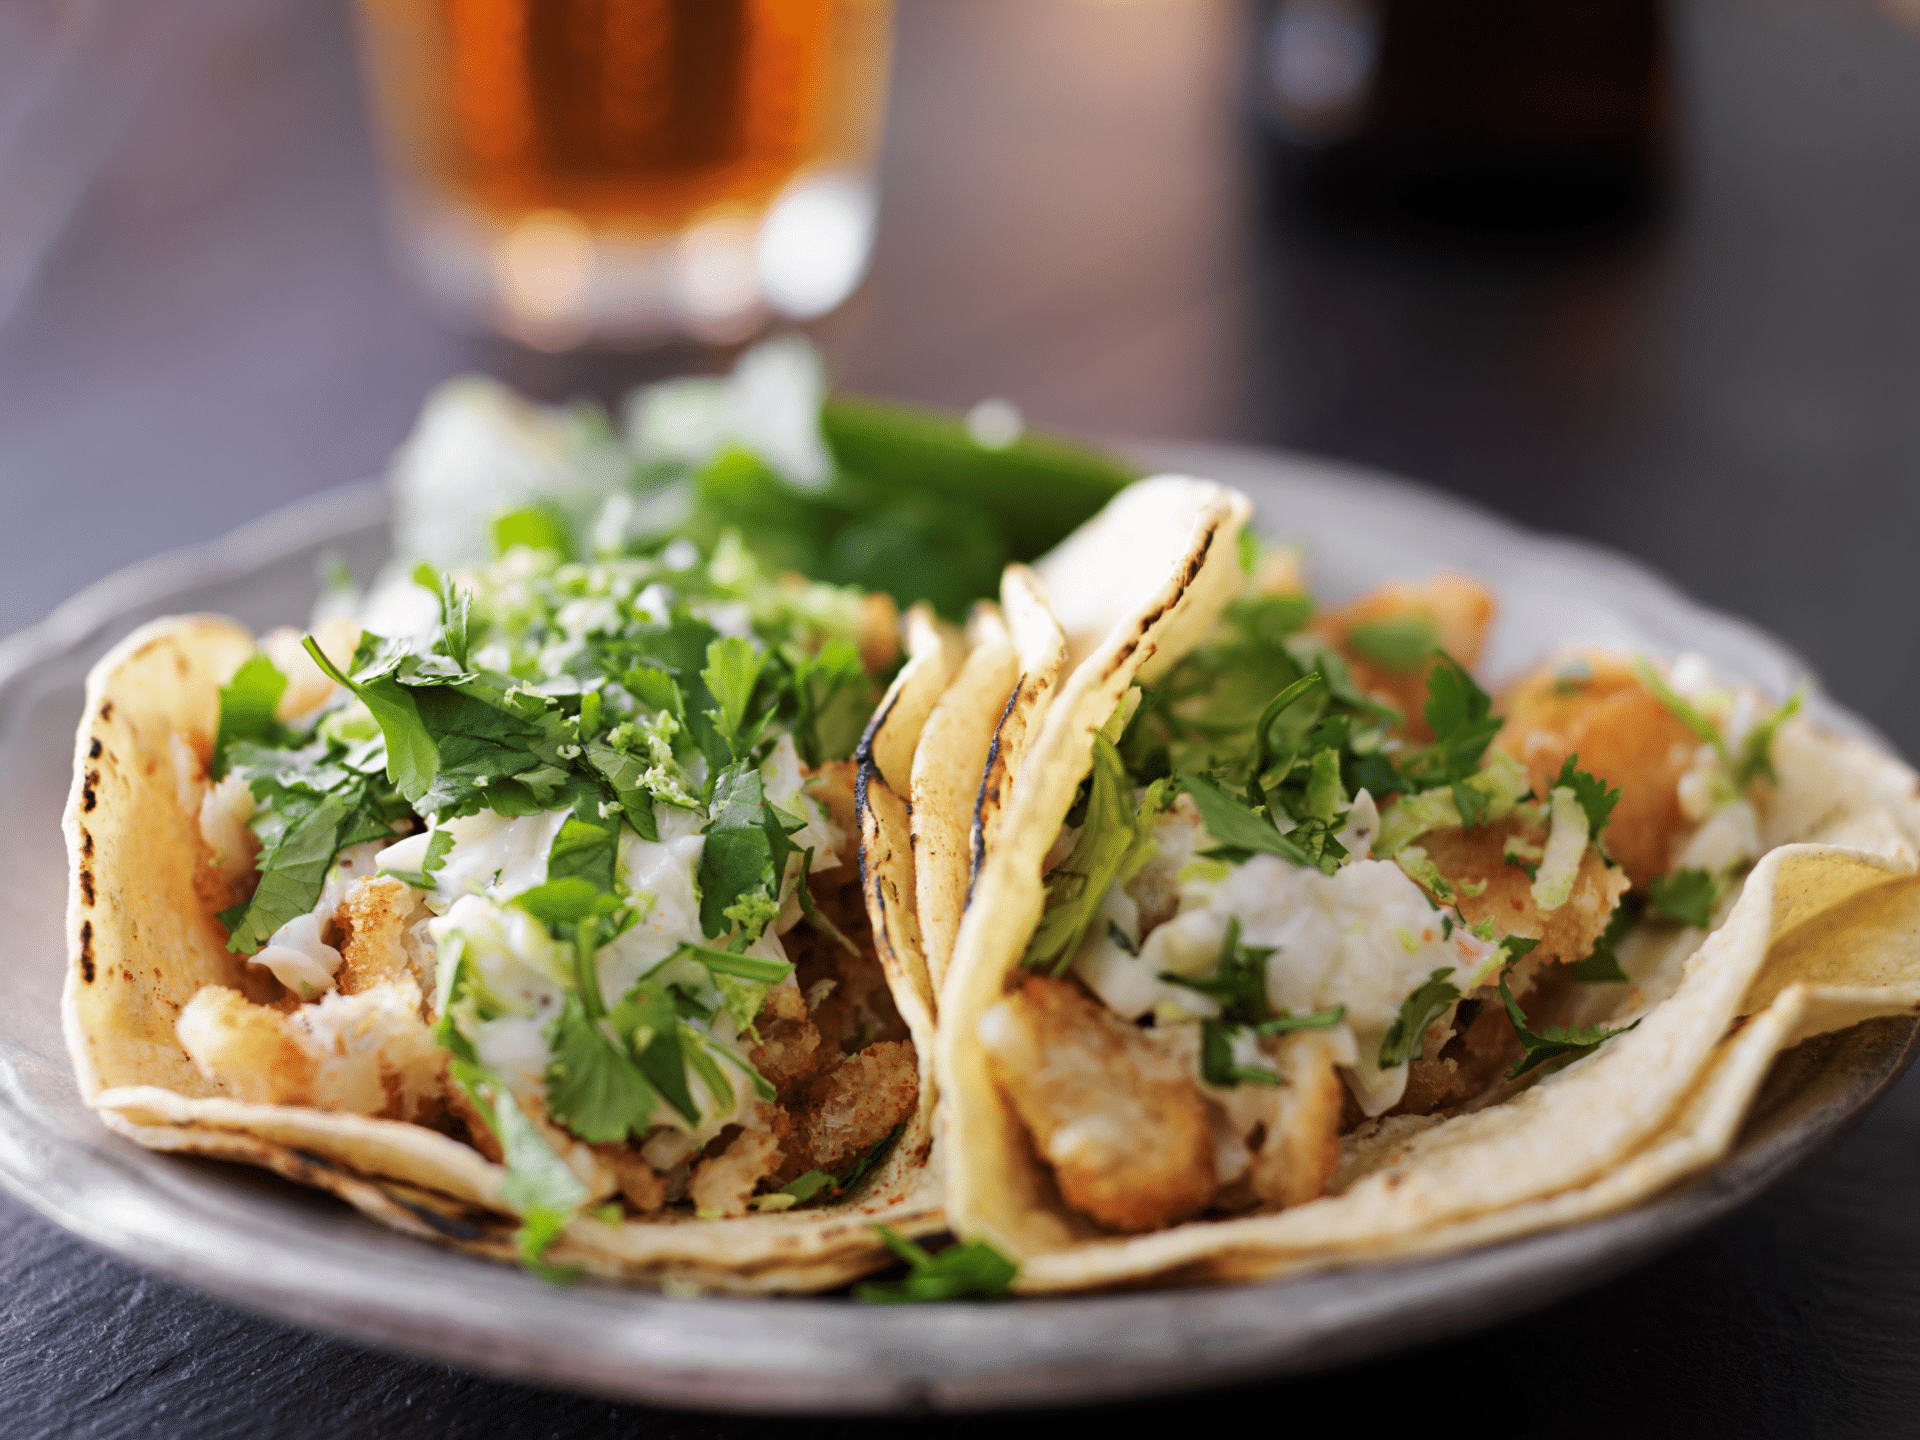 In search of the Best Fish Taco in North County San Diego – 10 Restaurants to Try